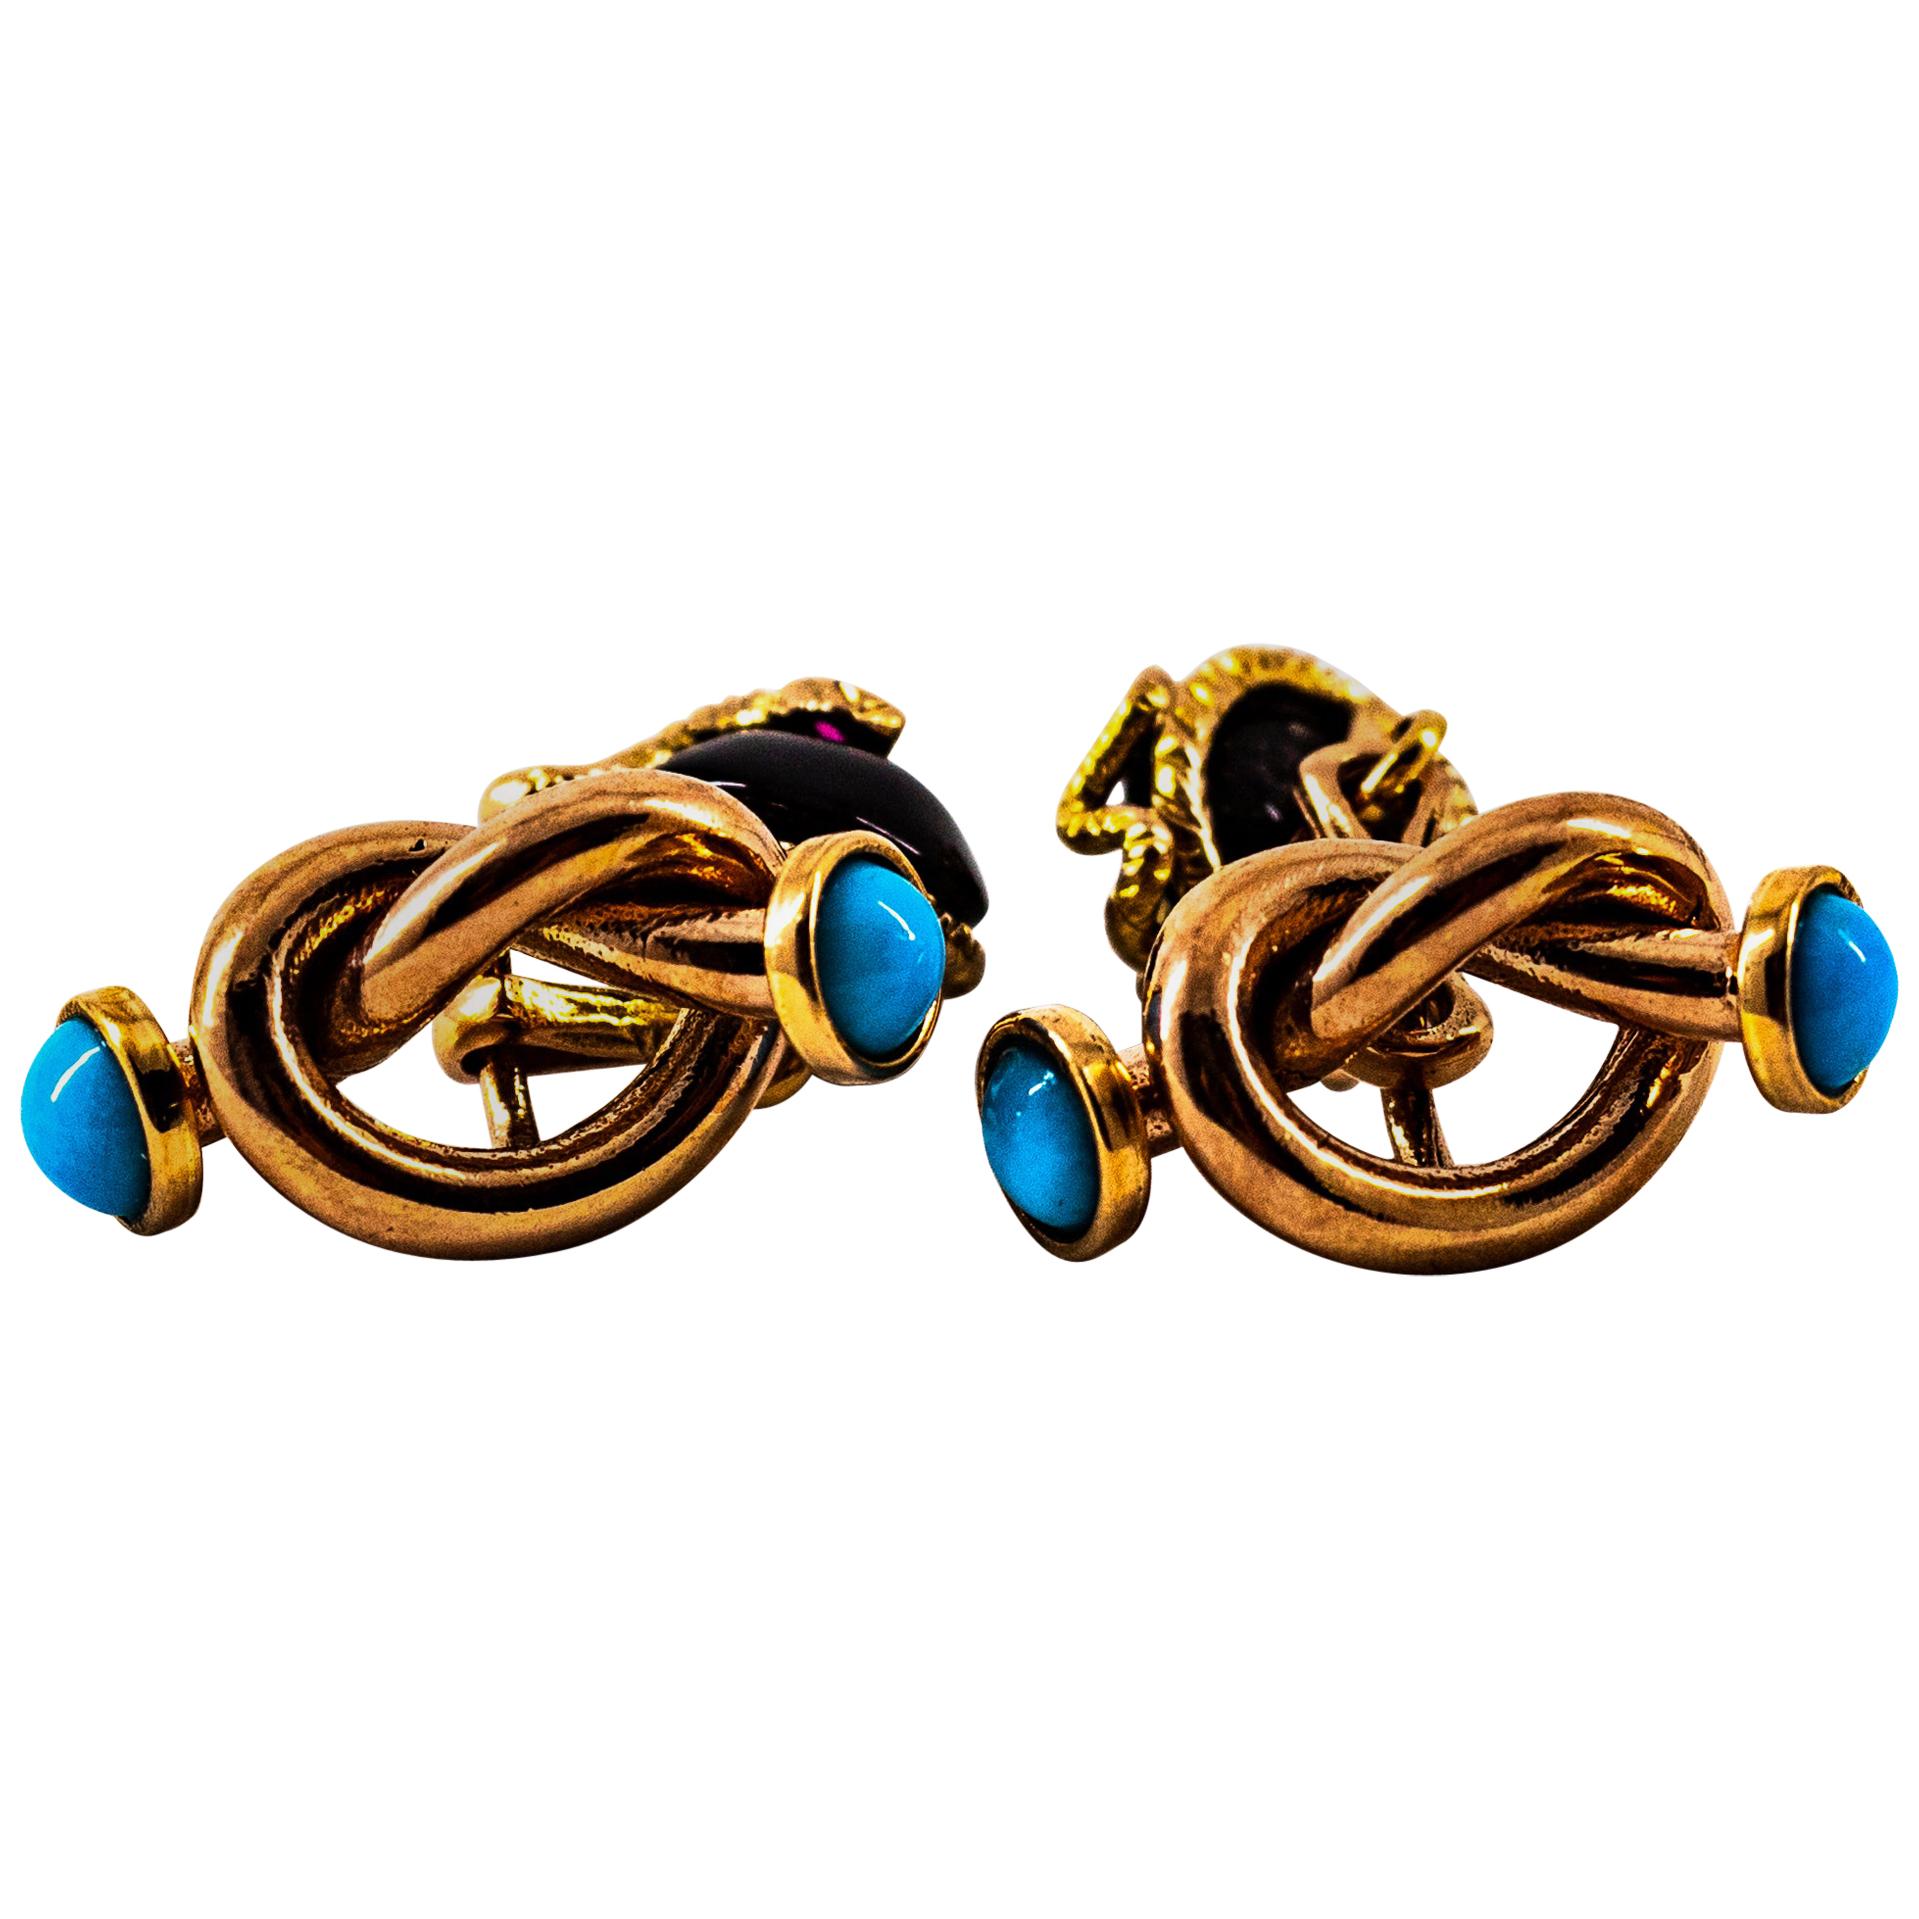 Art Deco Style 0.08 Carat Ruby Turquoise Onyx Yellow Gold "Knot" Cufflinks